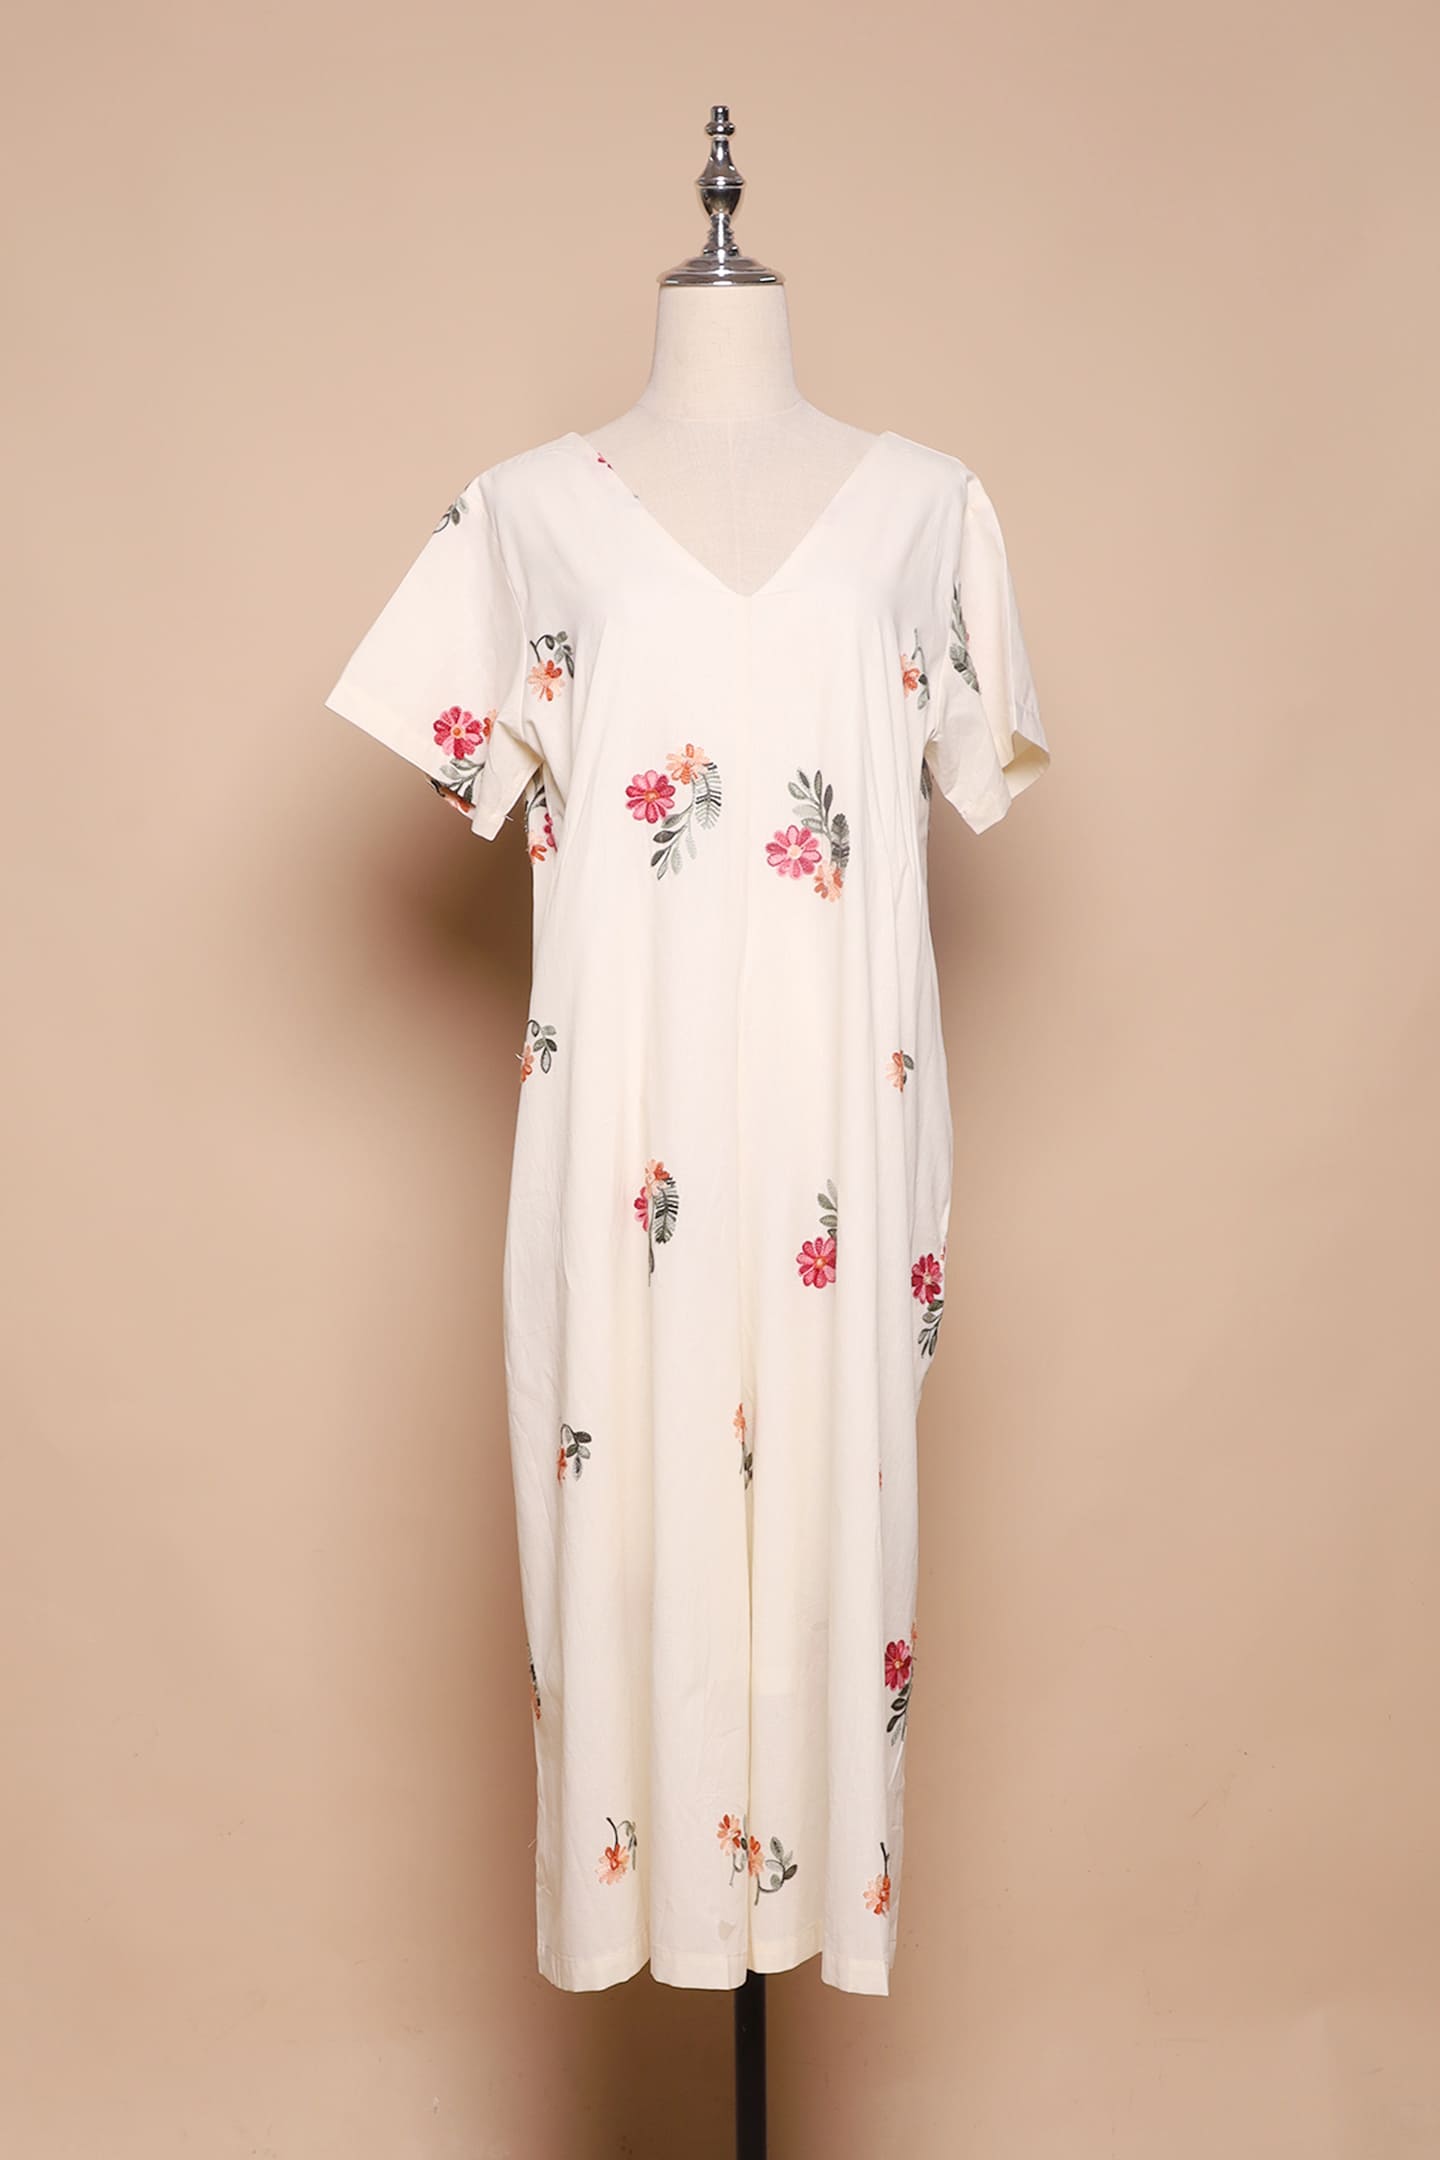 PO - Shirokuro Jumpsuit in Floral Embroidery